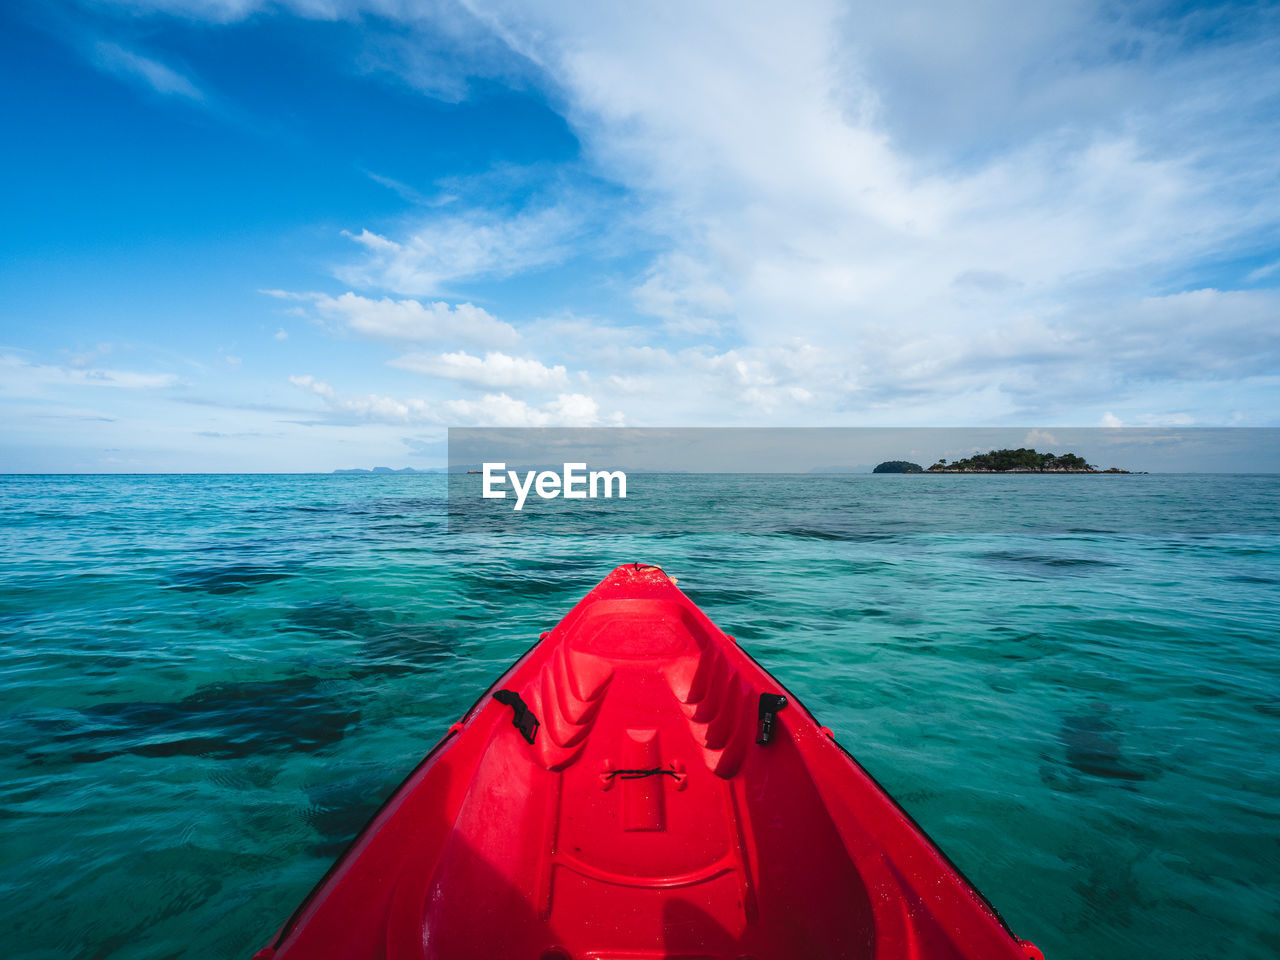 First person view of kayak head to small island. float on turquoise sea. koh lipe island, thailand.